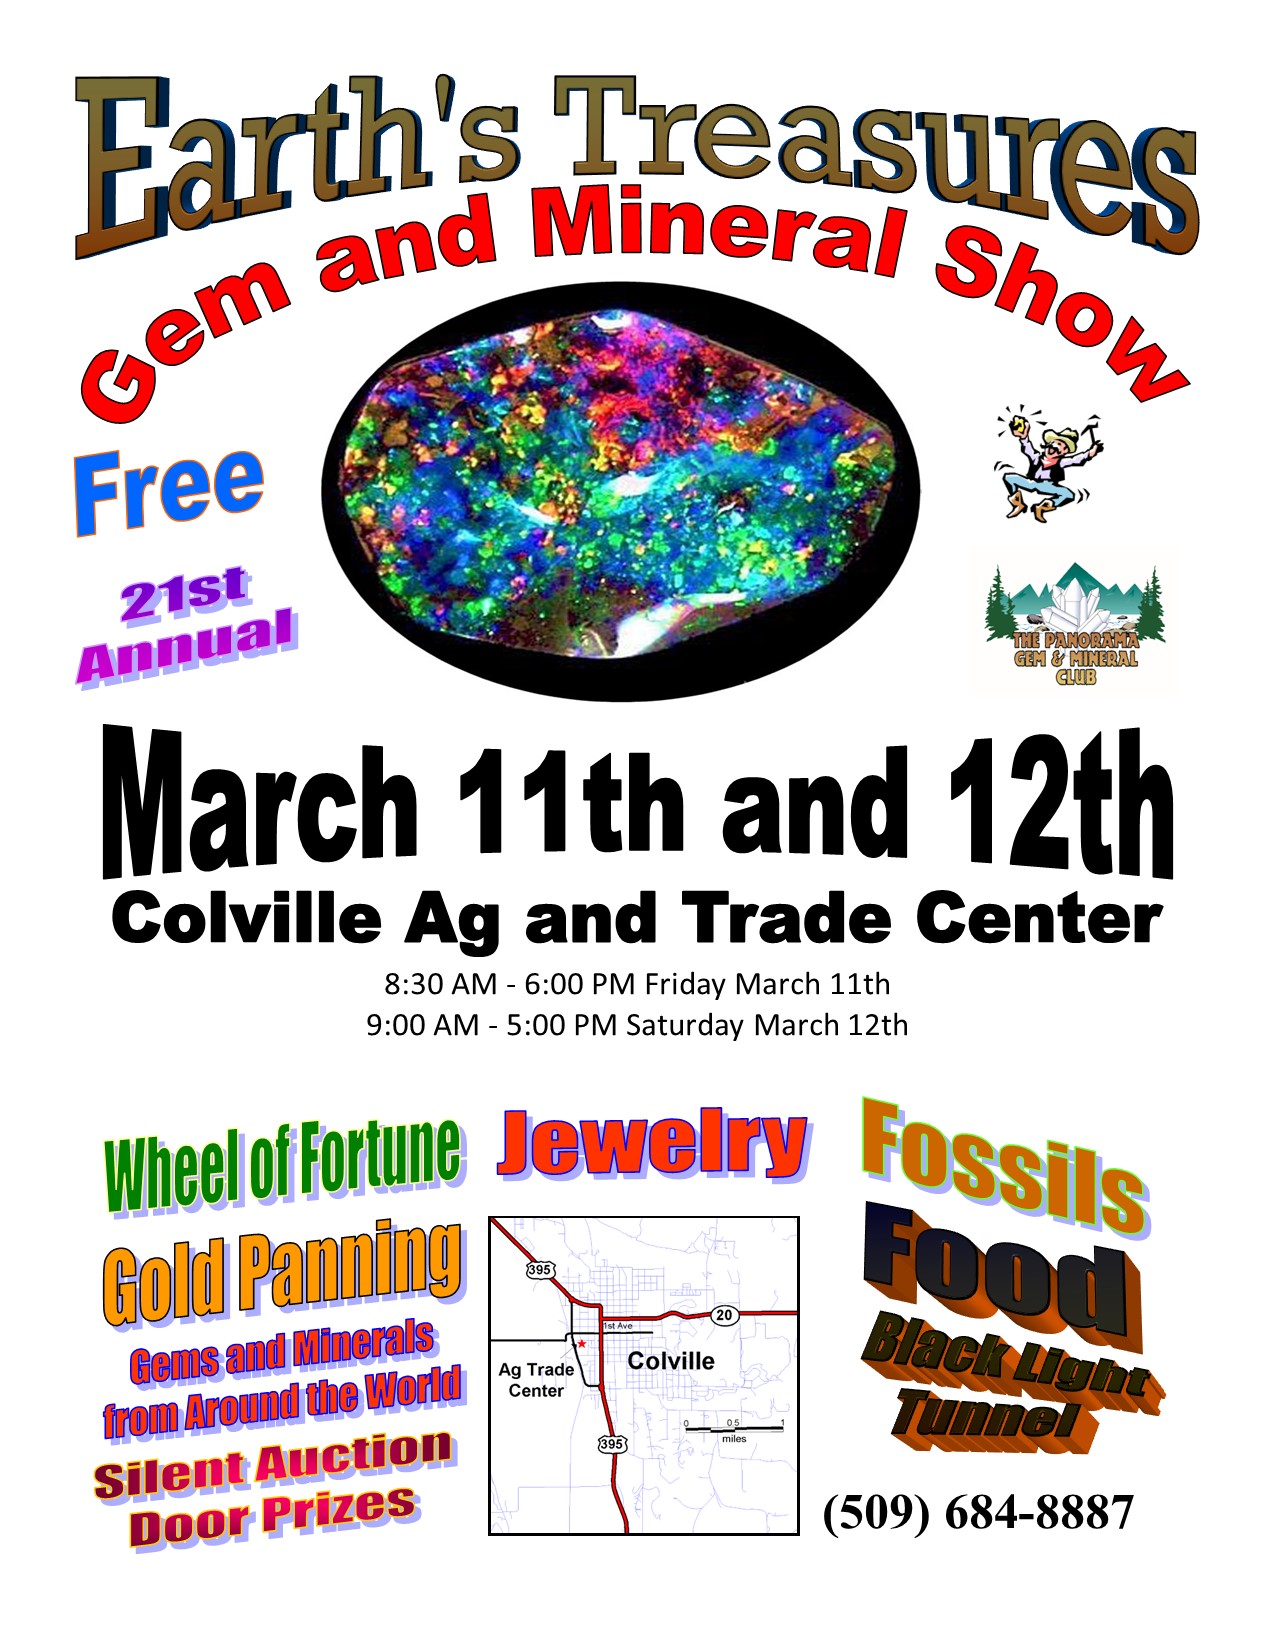 GEM AND MINERAL SHOW